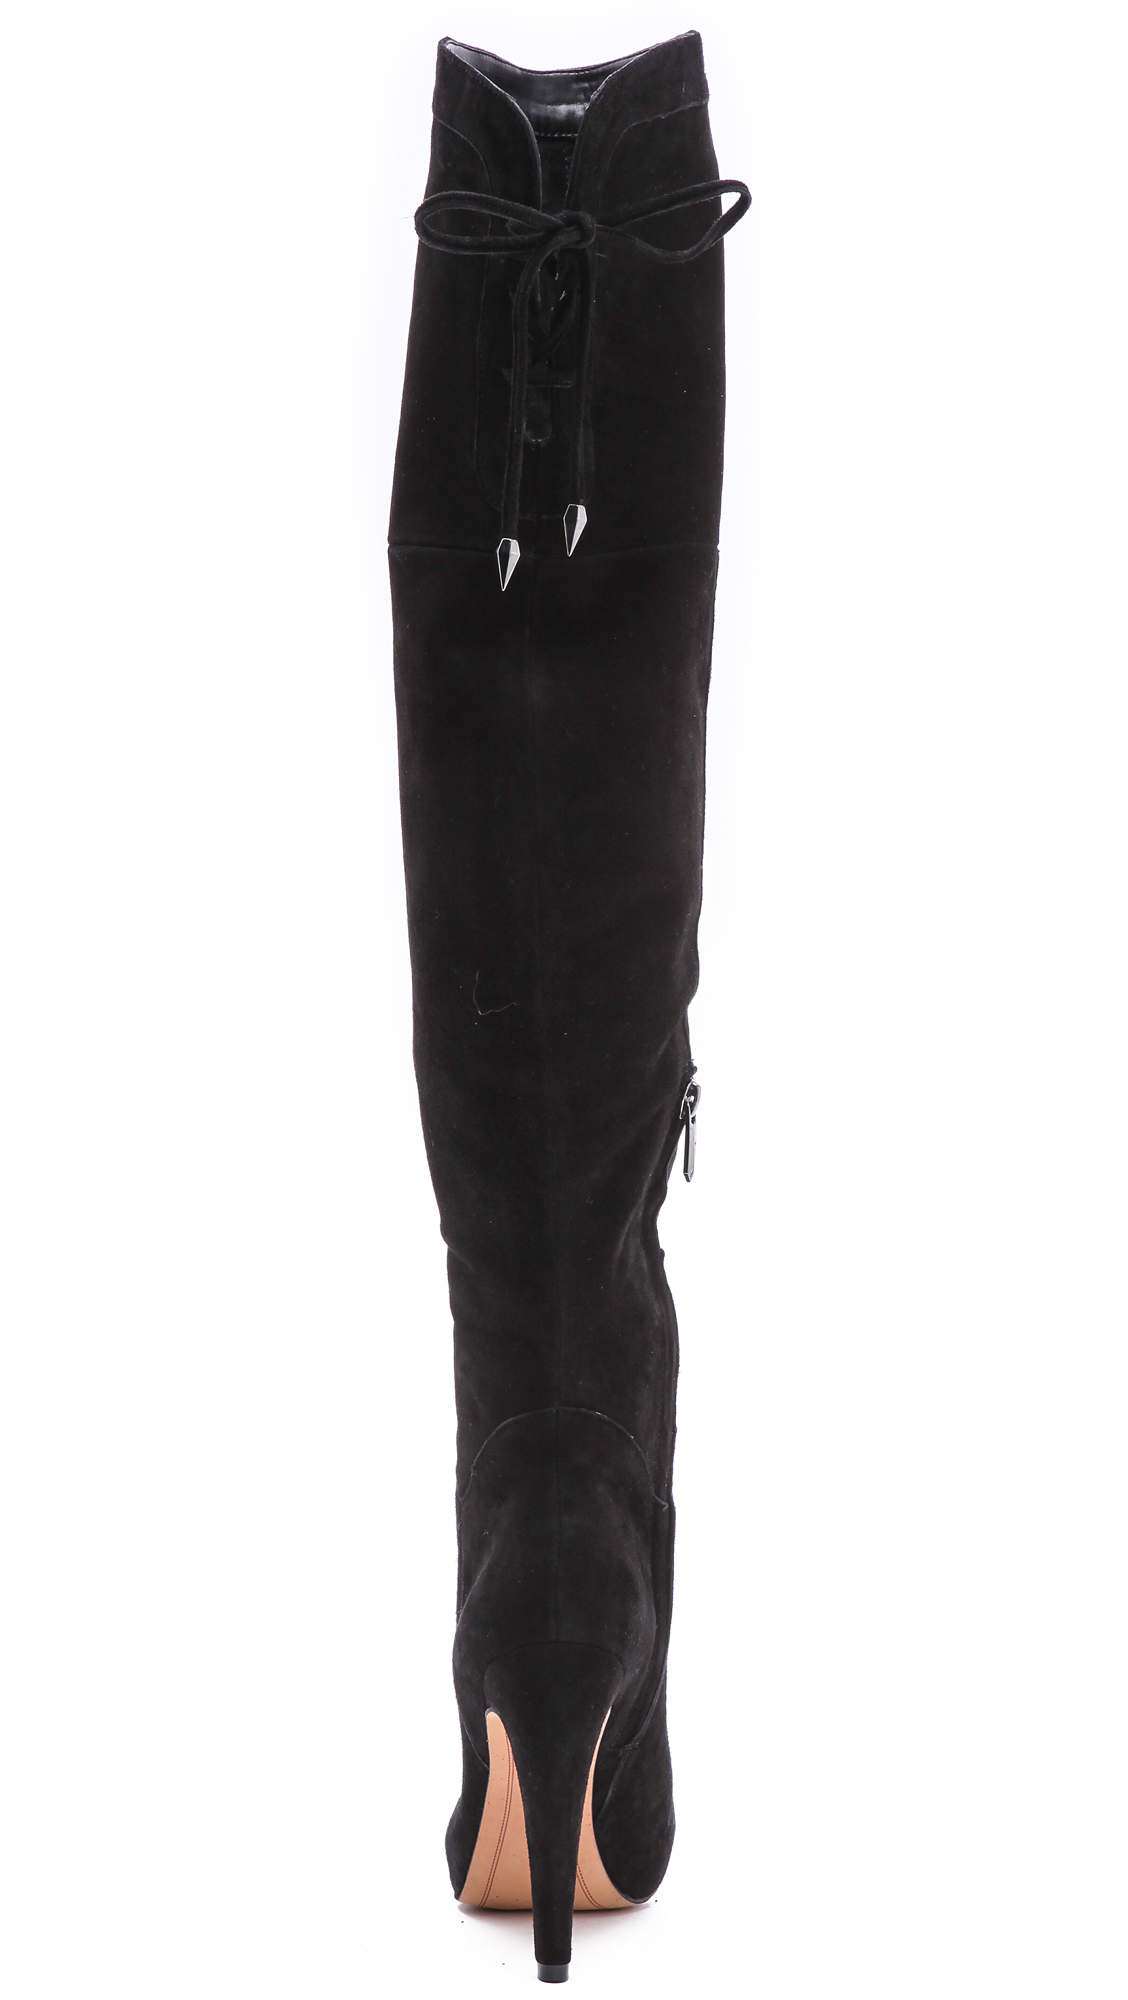 Lyst - Sam edelman Kayla Over The Knee Boots in Black